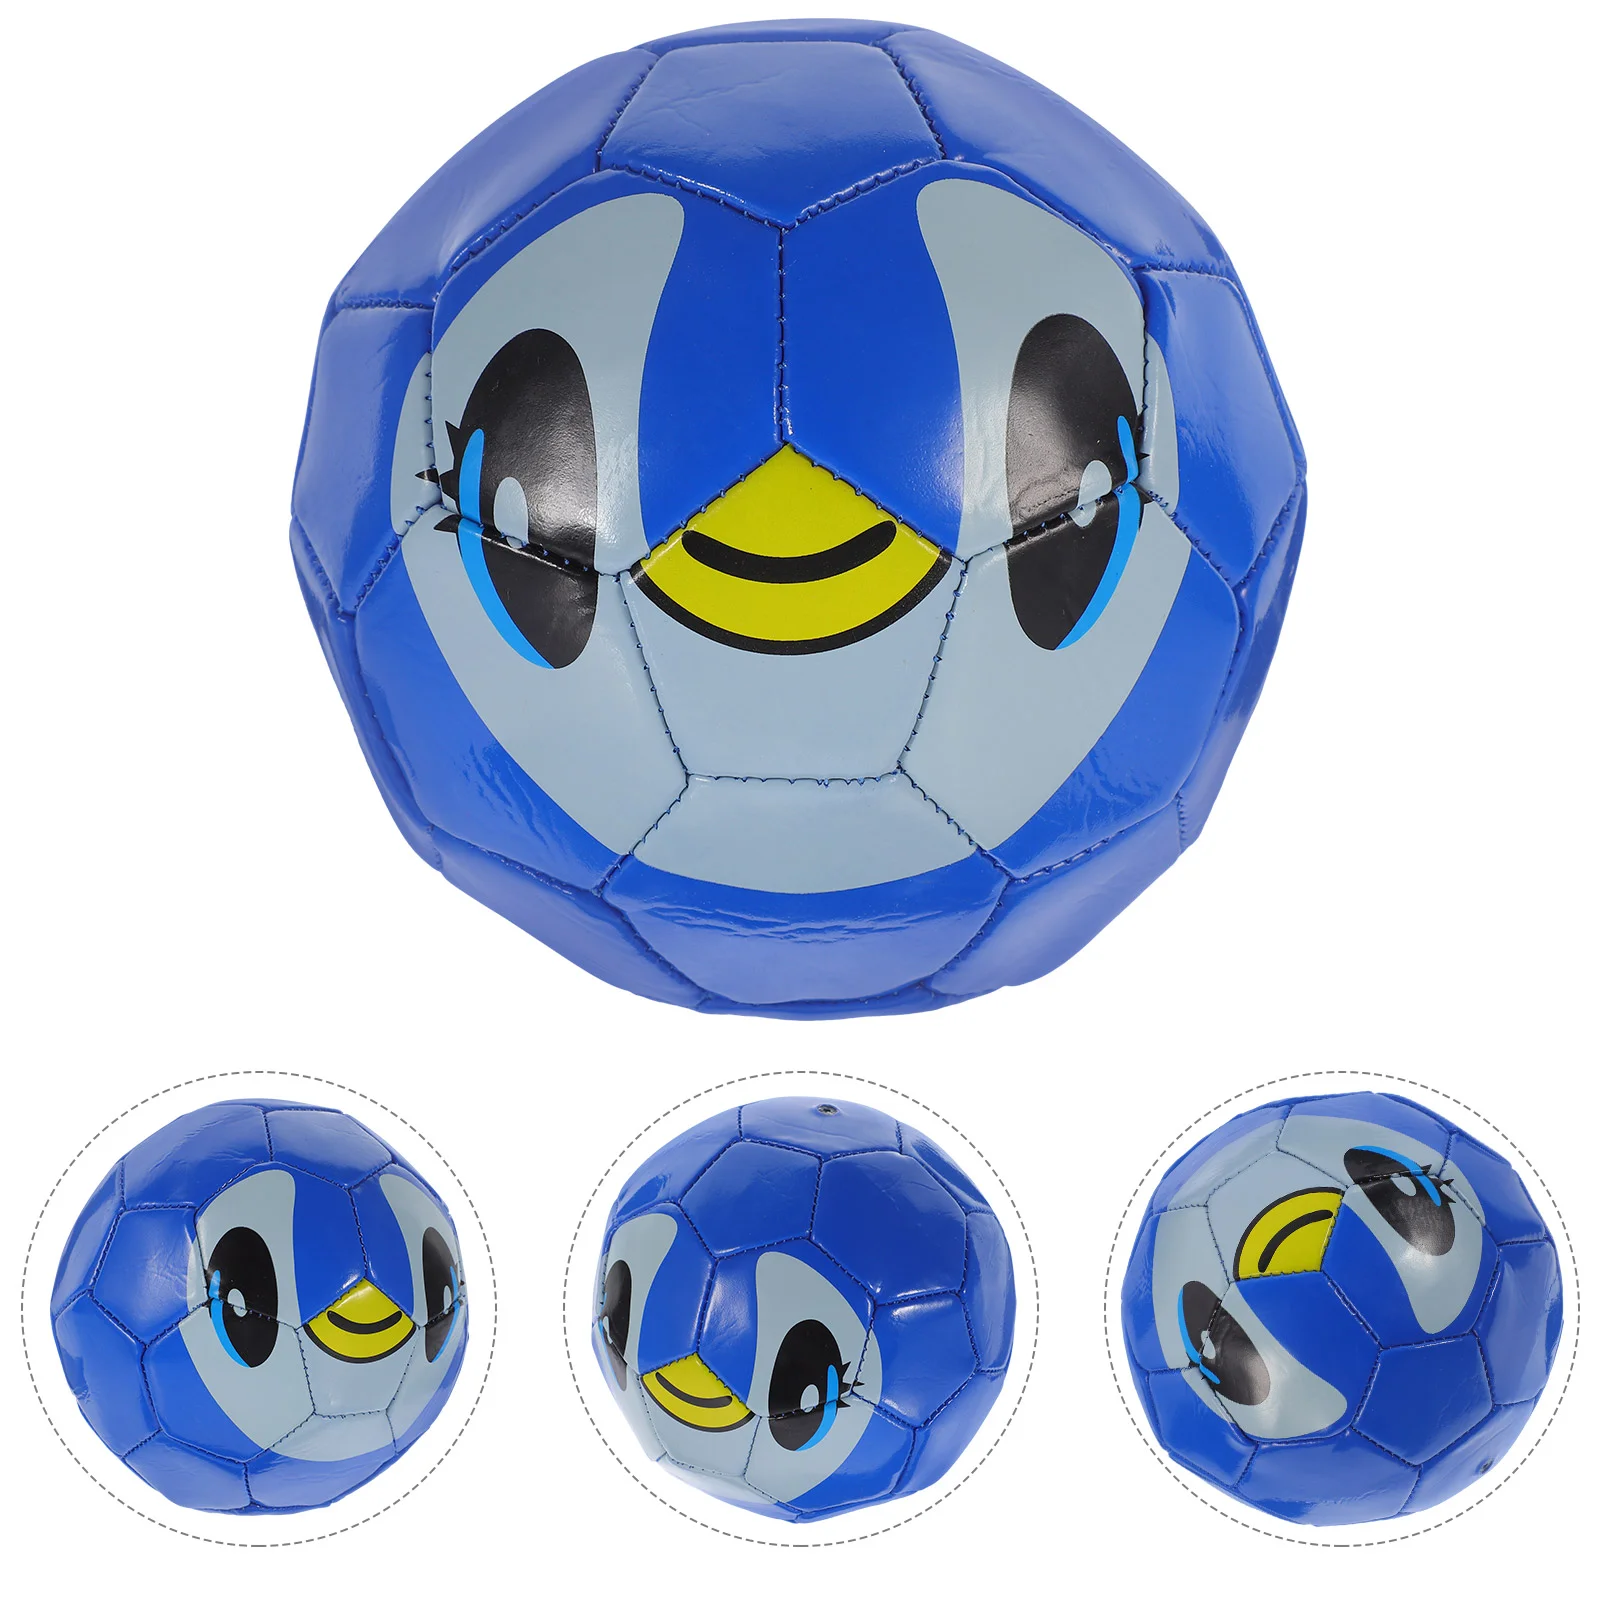 

Soccer Parent-child Football Exercising Match Competition Balls for Toddlers Aldult Kids Cartoon Training